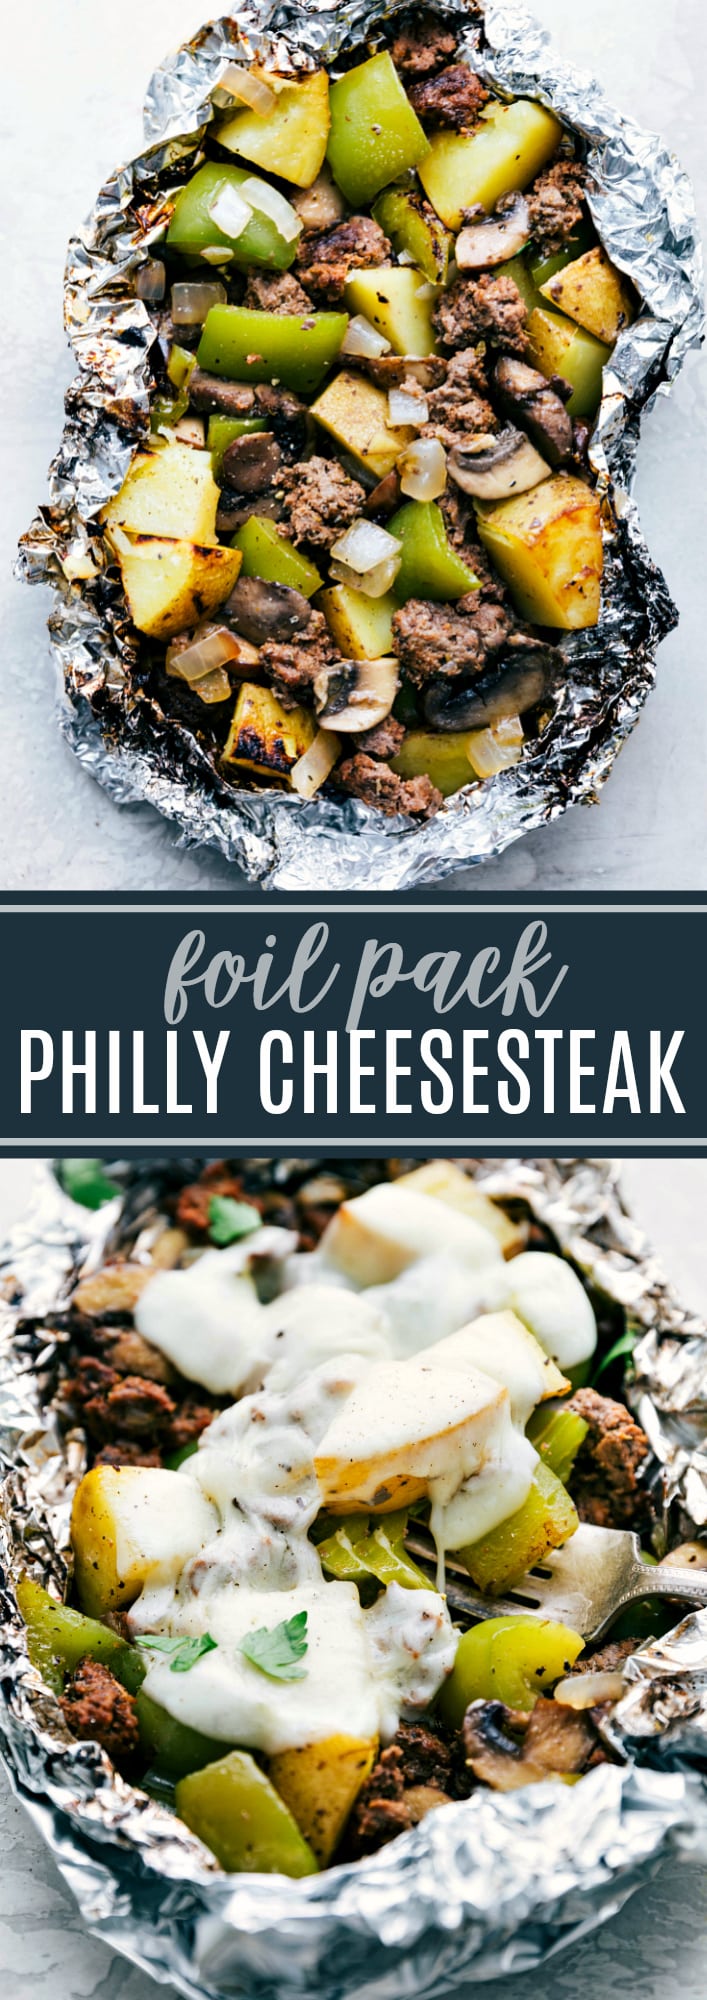 The BEST easy tin foil dinner -- foil pack philly cheesesteaks! Easy to assemble, filling, and delicious! Directions for campfire, grill, or oven! via chelseasmessyapron.com #philly #cheesesteak #foil #packet #dinner #easy #quick #beef #hobo #pack #green #pepper #onion #campfire #grill #oven #seasoning #flavorful